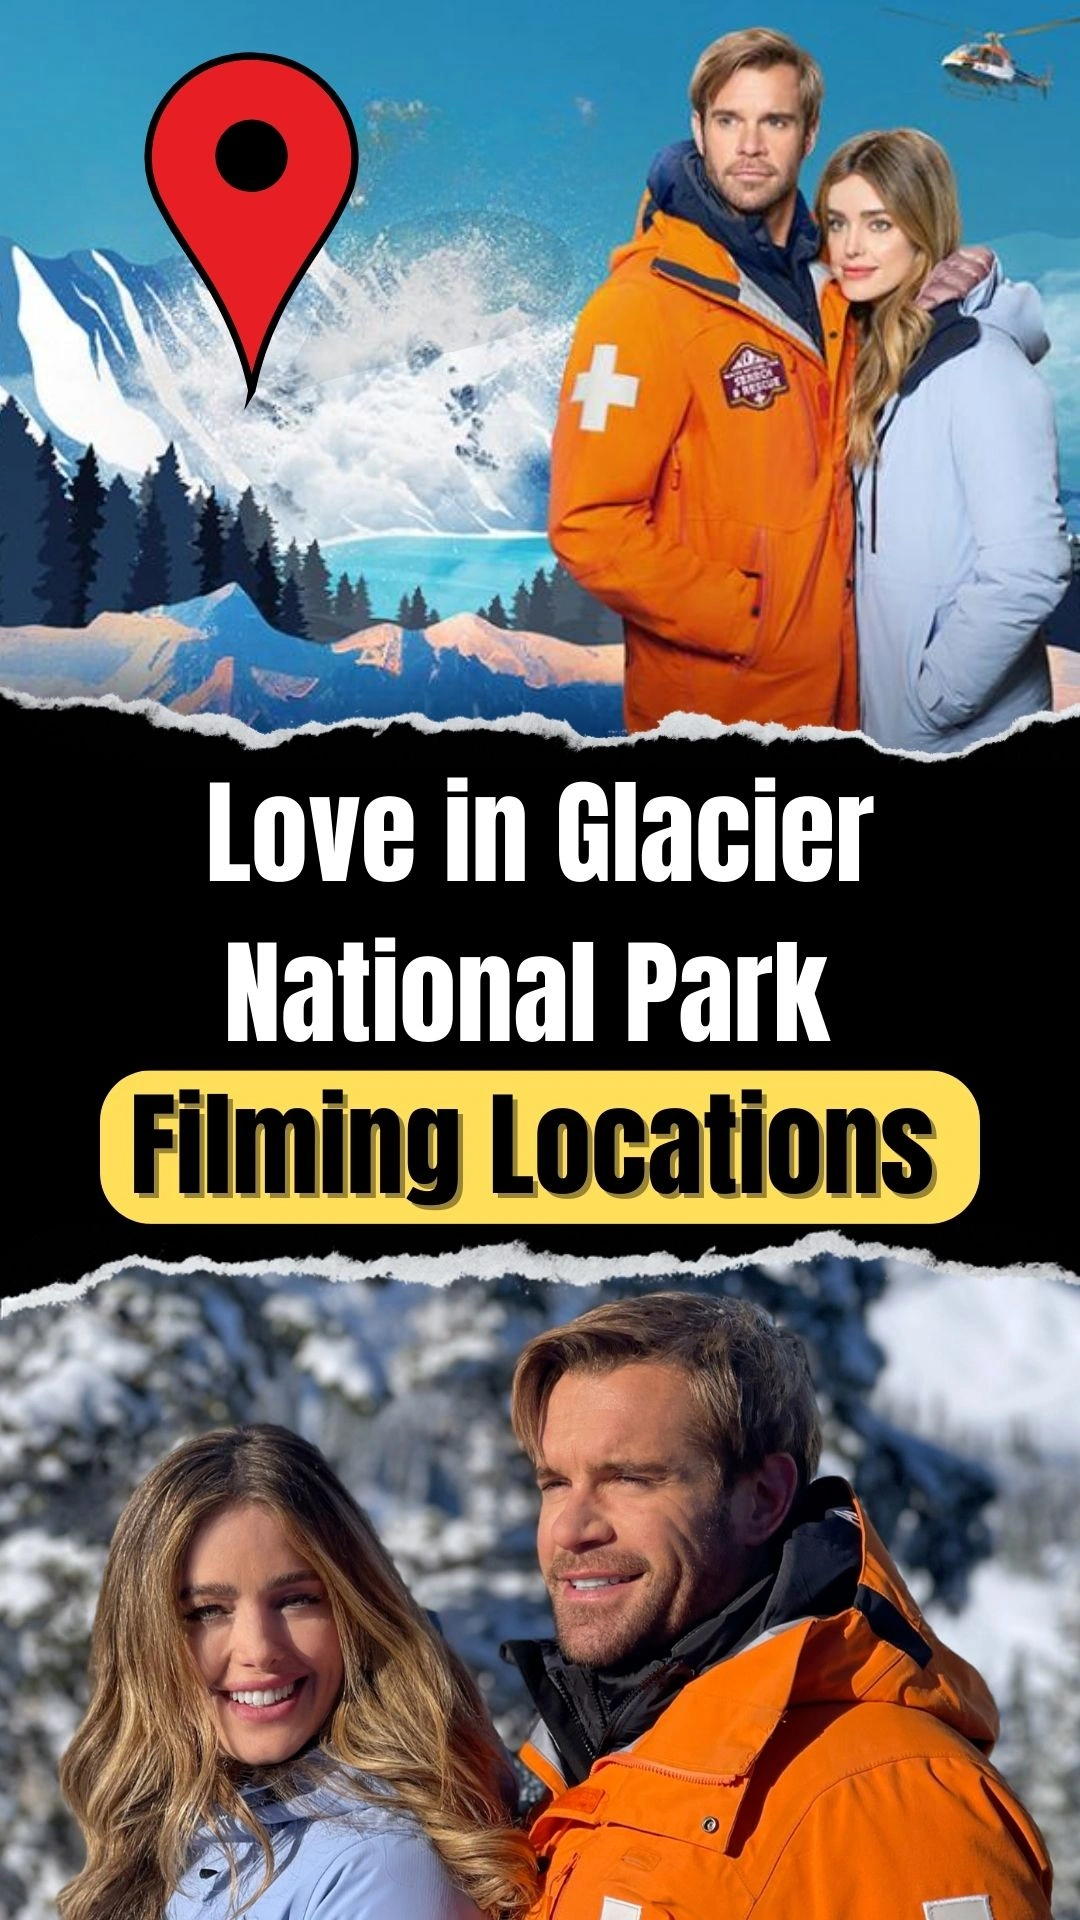 Love in Glacier National Park Filming Locations